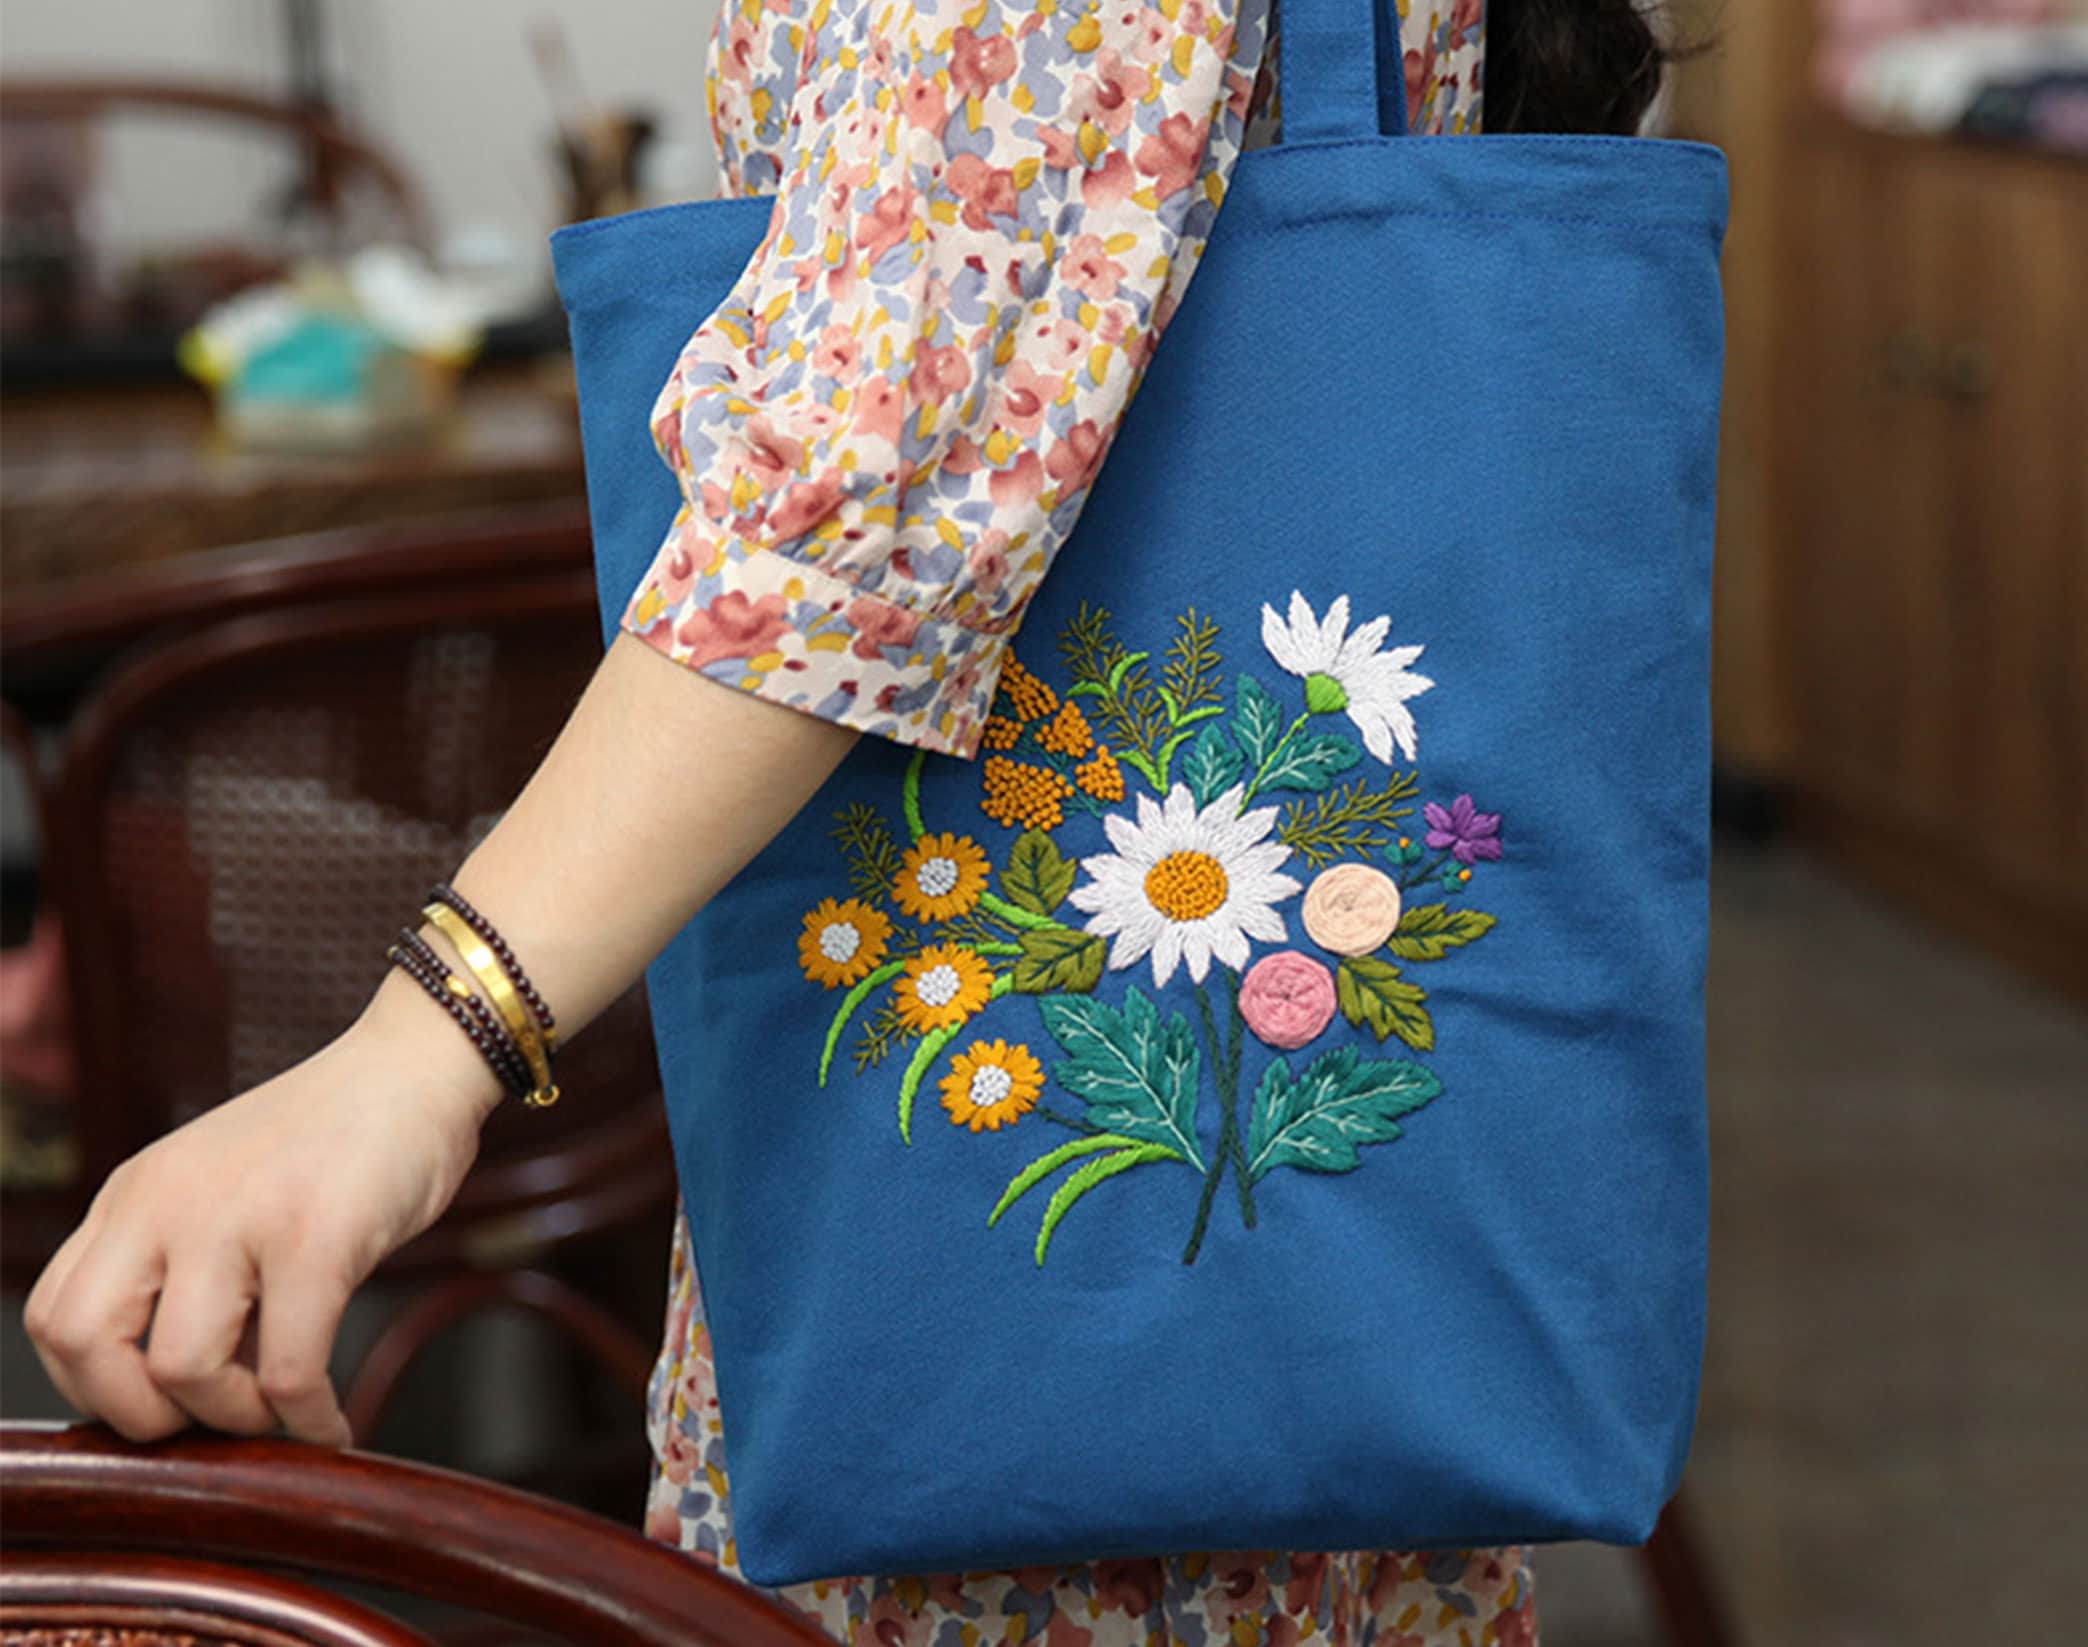 DIY Flower Embroidery Bag Kit for Beginners, Canvas Tote